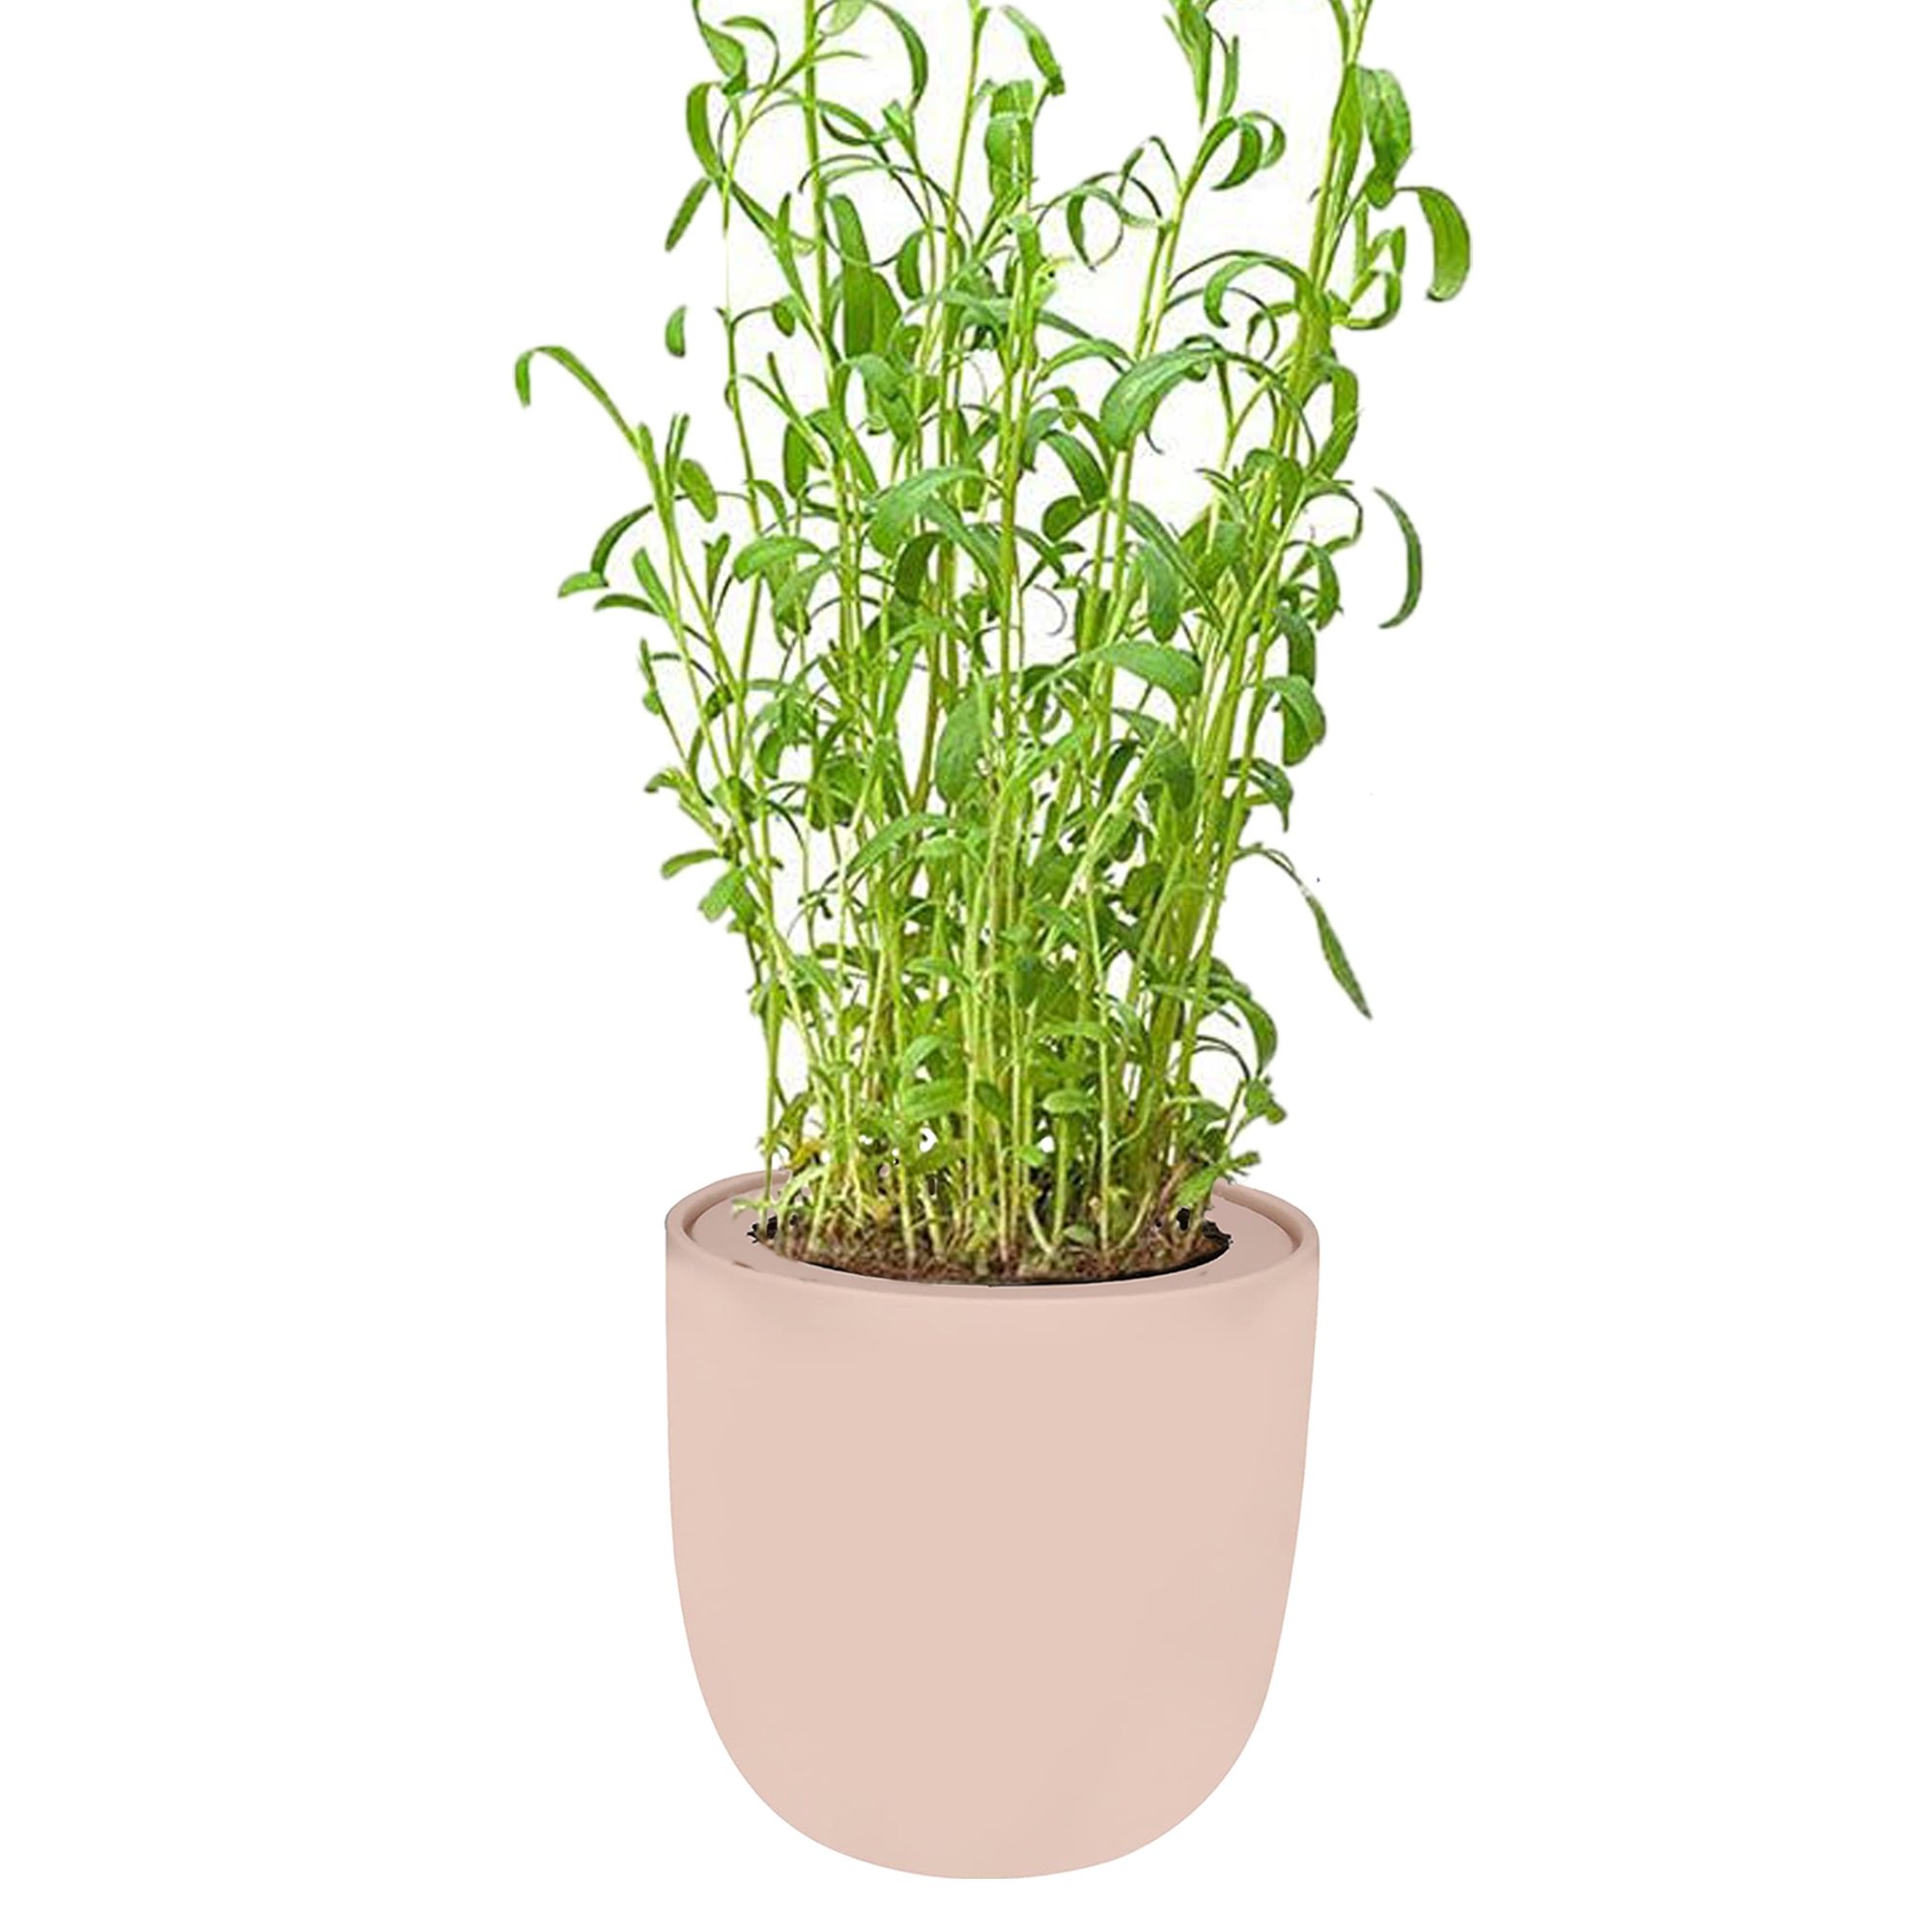 Tarragon Pink Ceramic Pot Hydroponic Growing Kit with Seeds